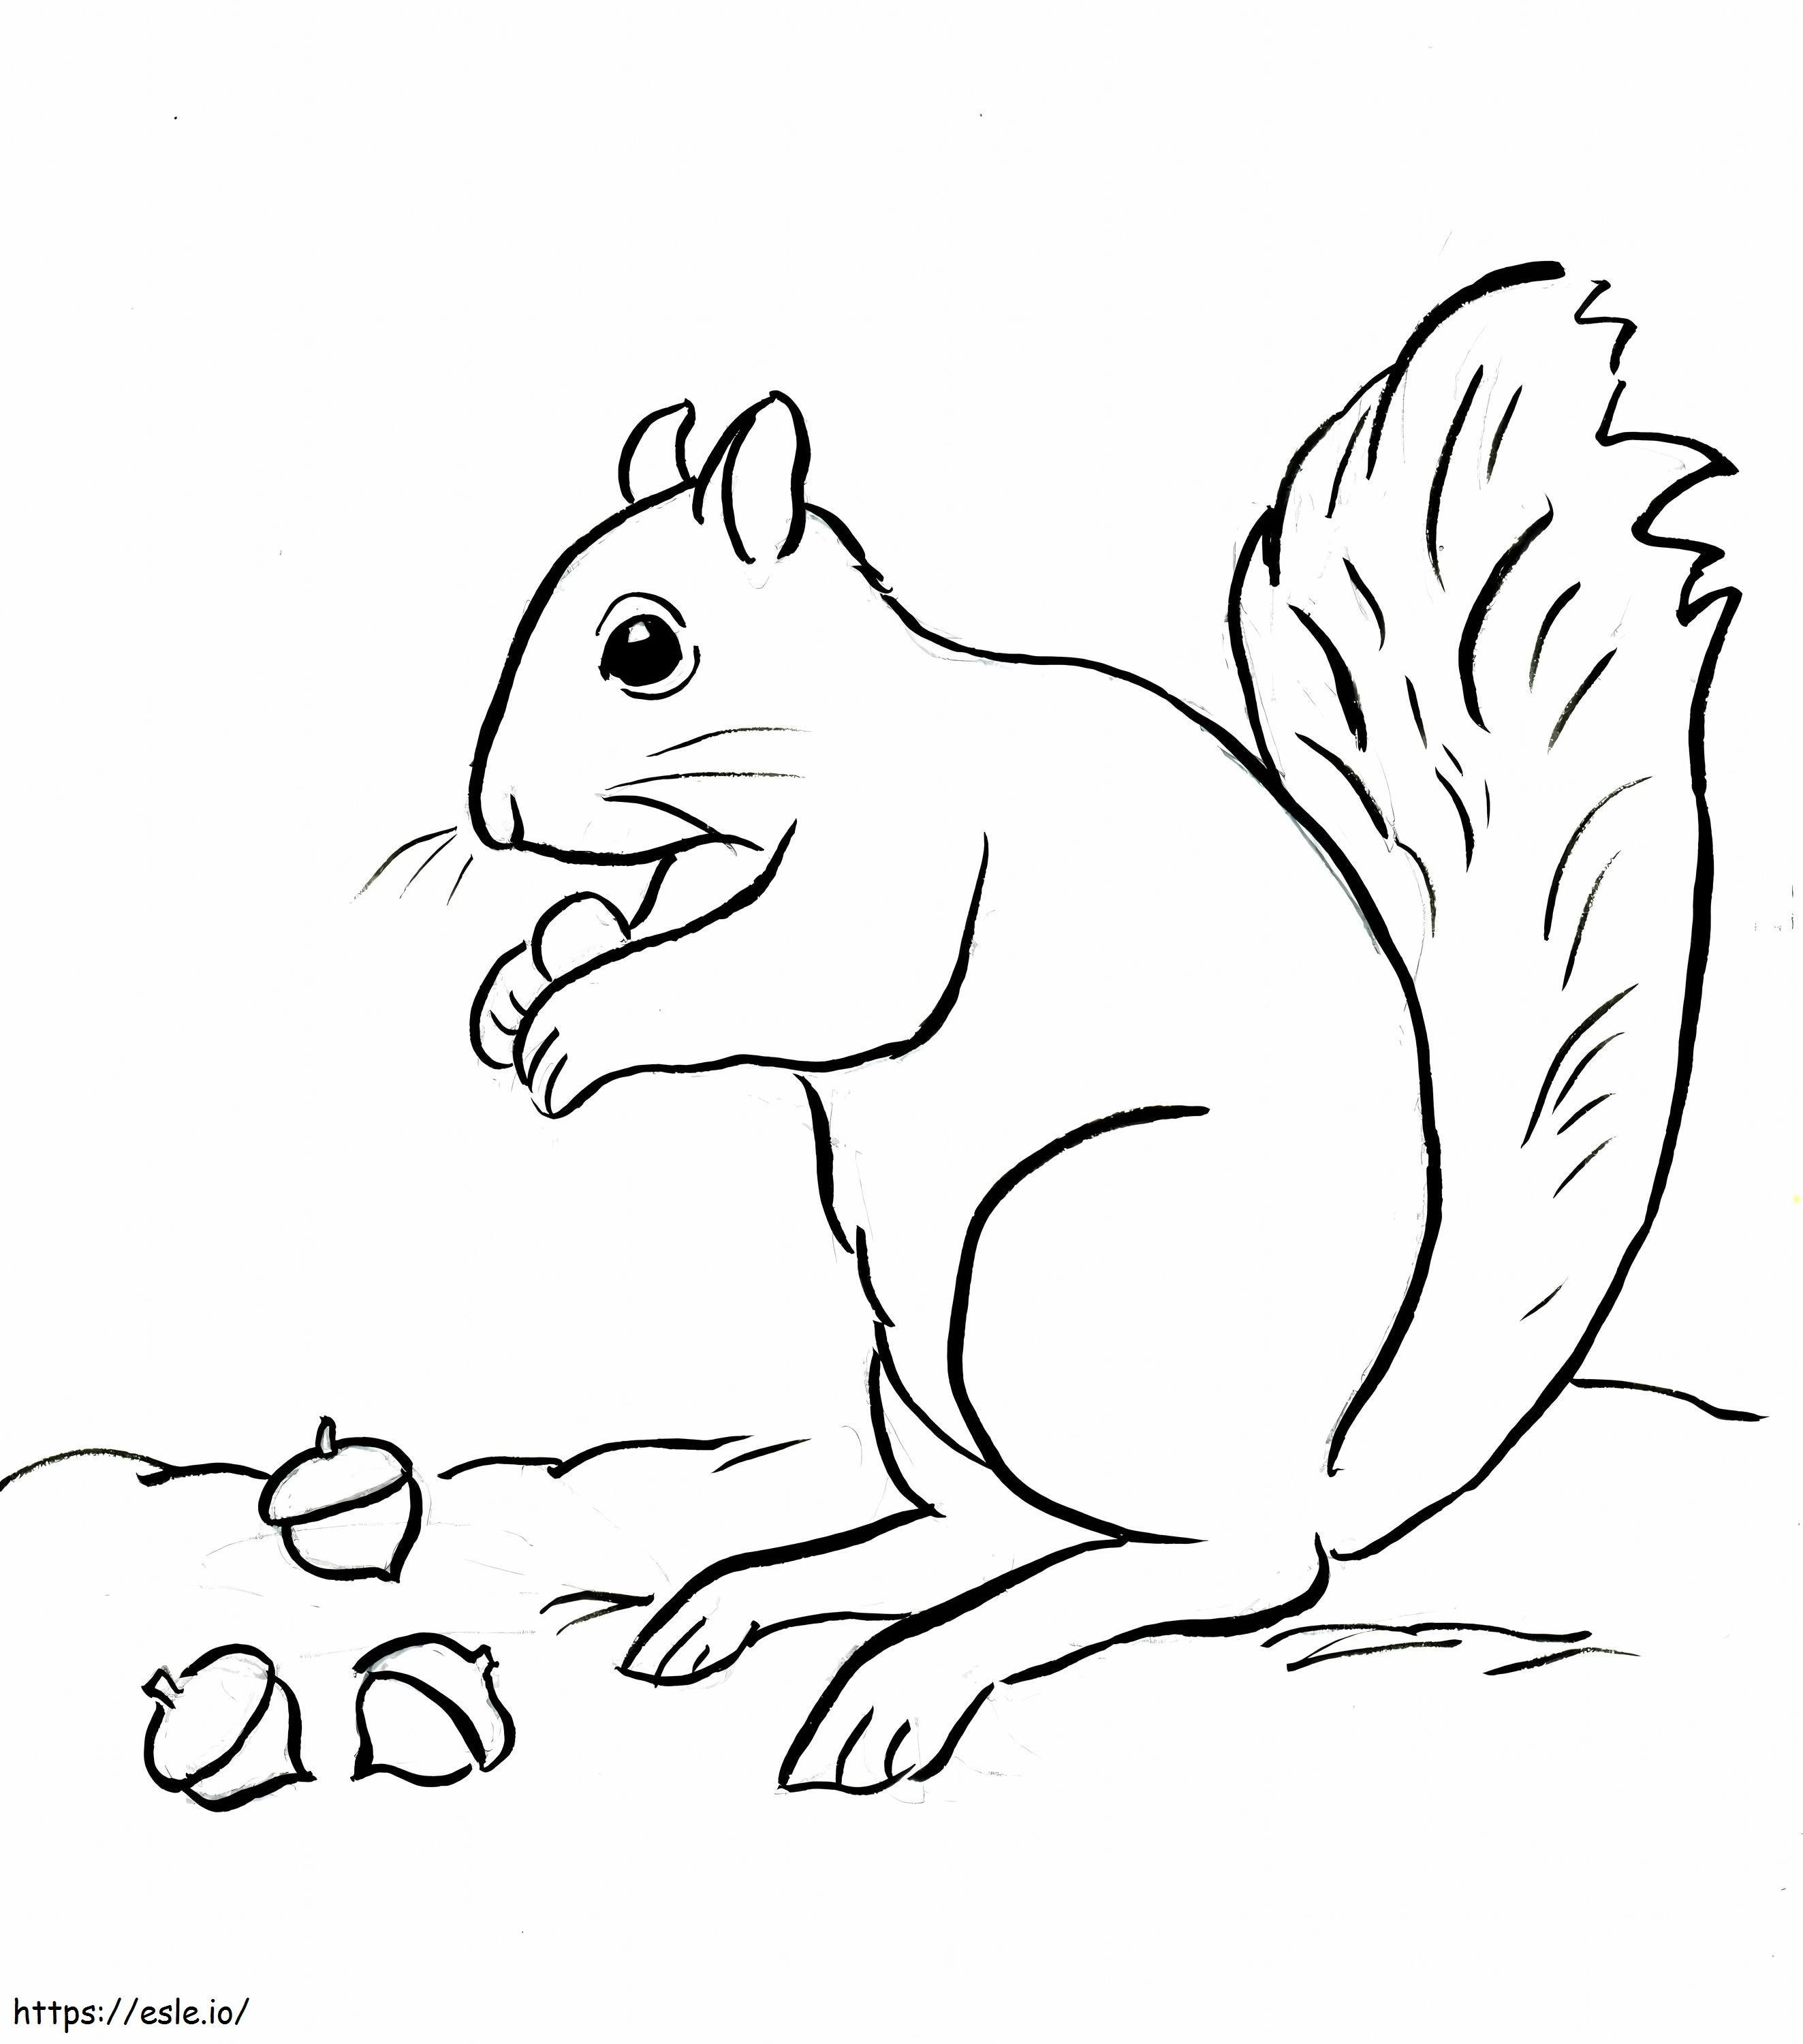 Squirrel And Three Scaled Acorns coloring page